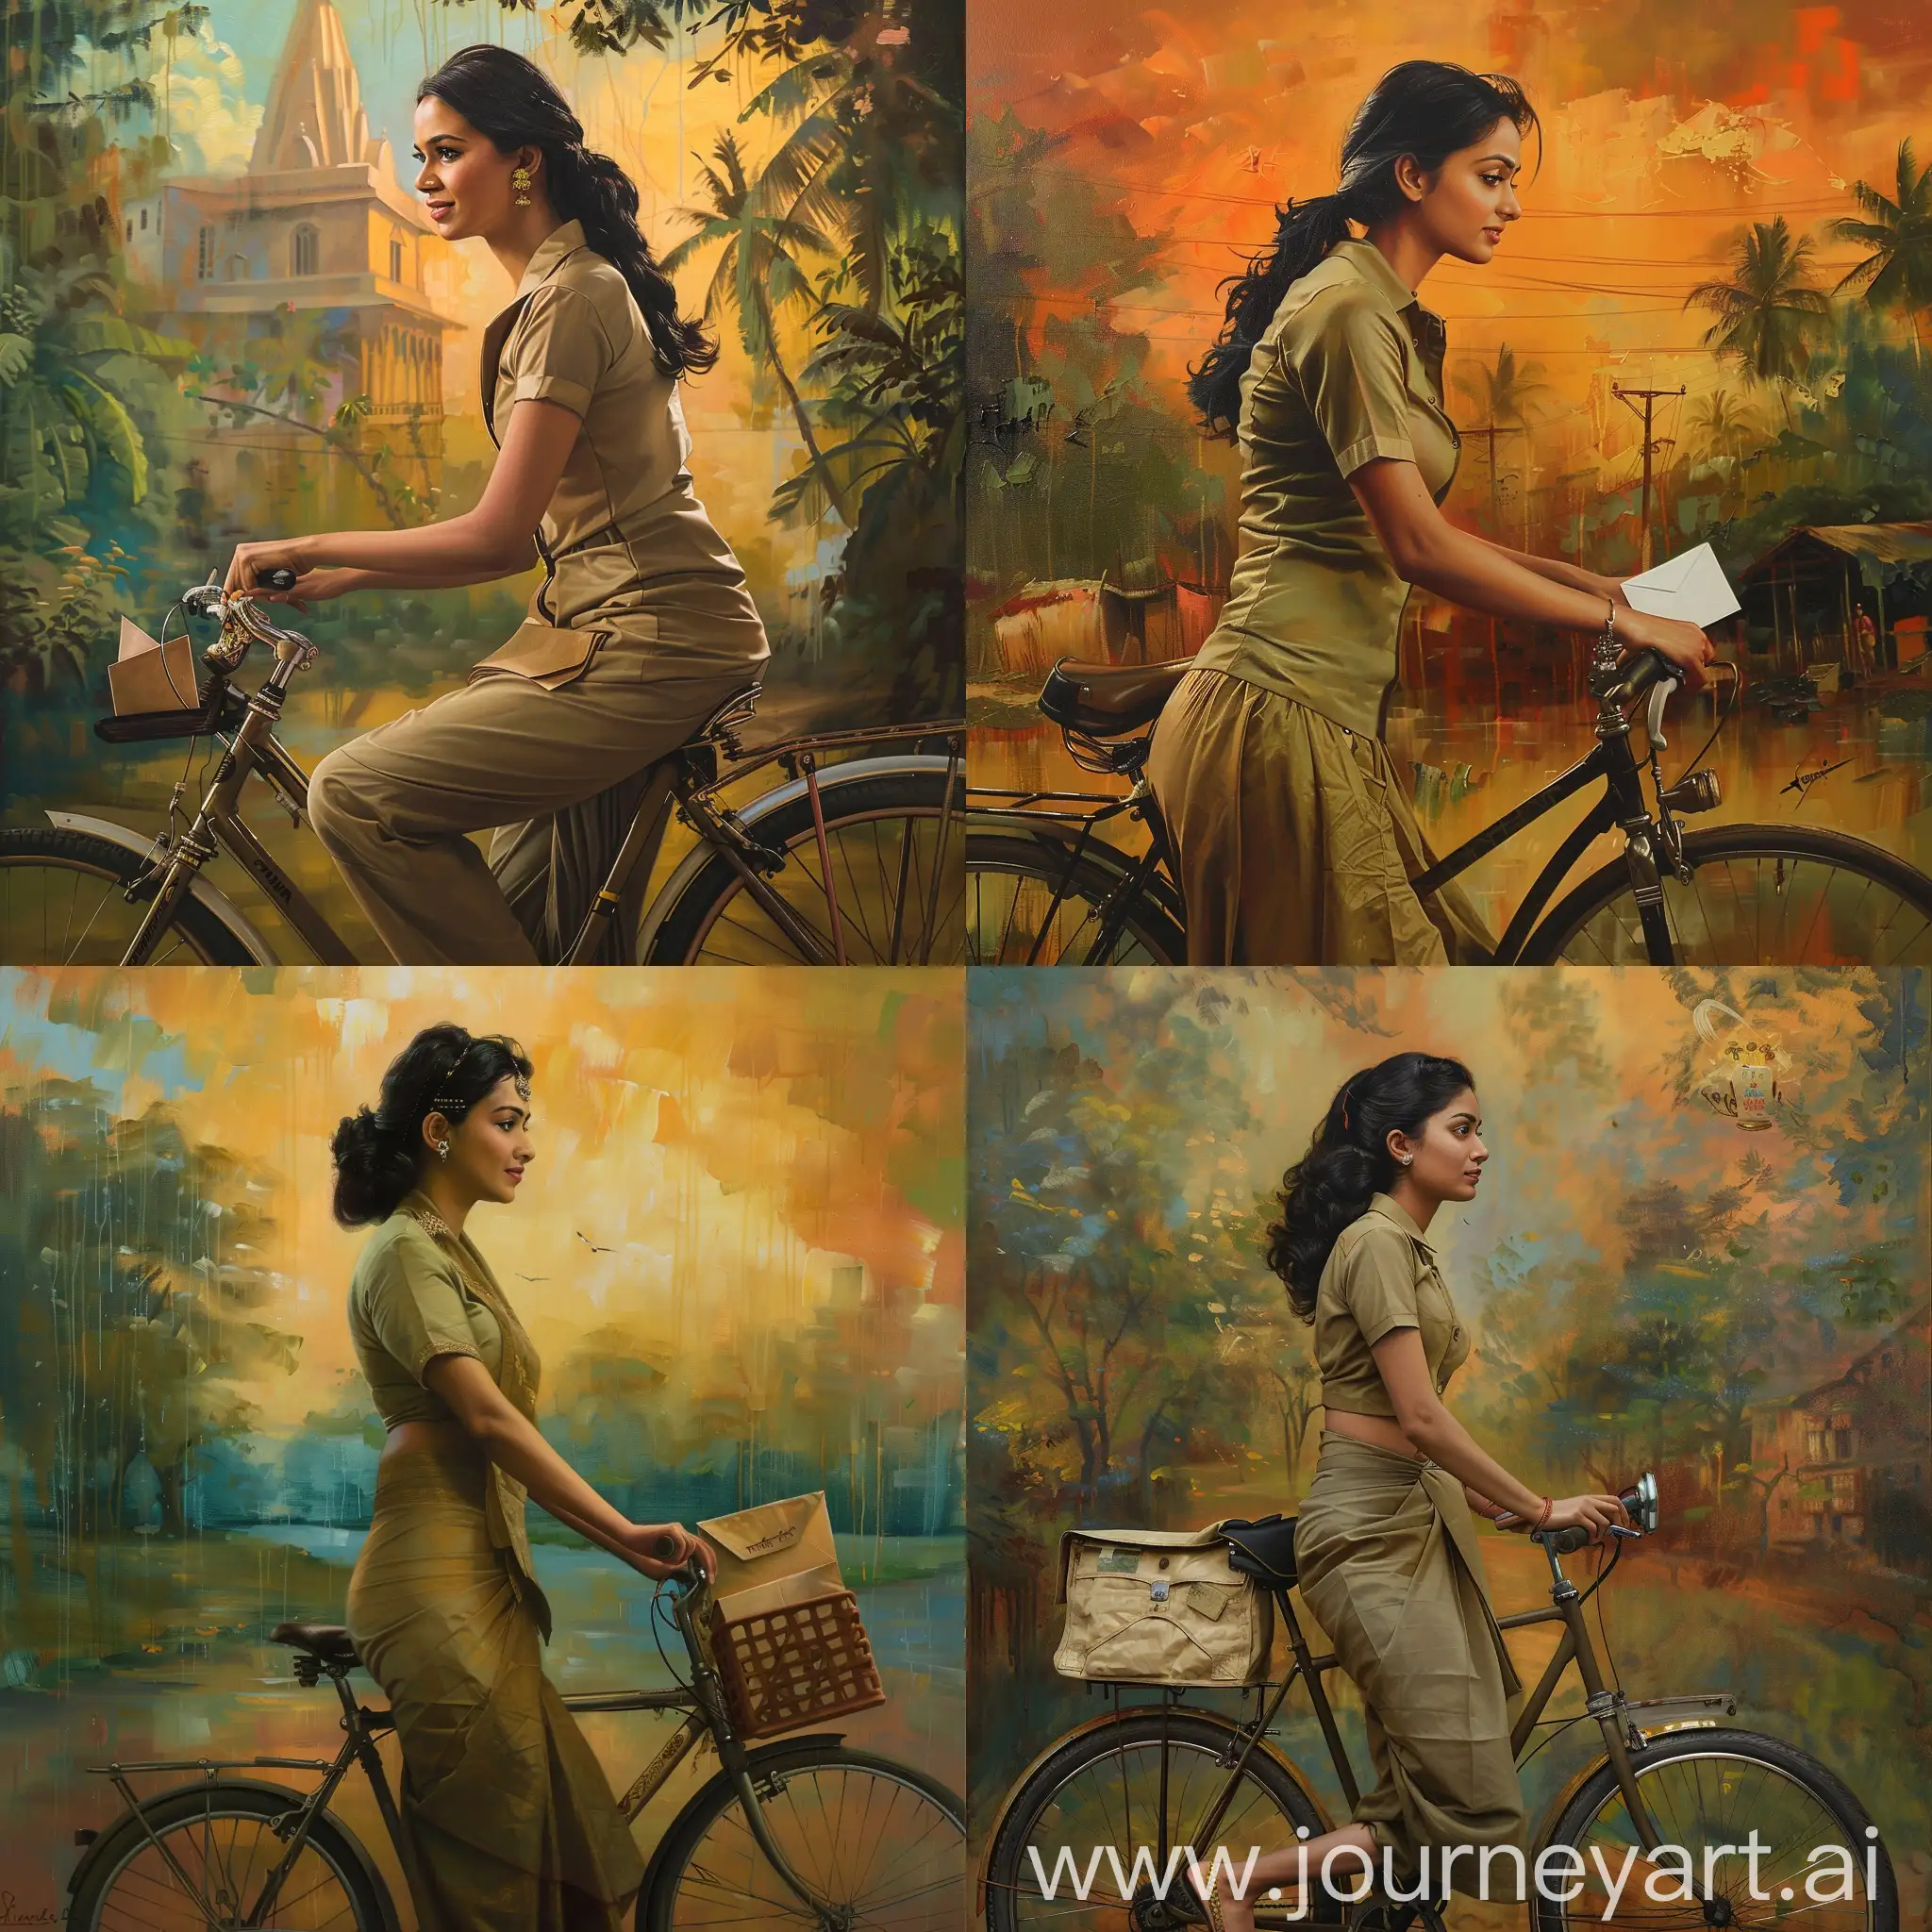 A hyperrealistic painting of a very beautiful elegant attractive Kerala Postwoman, delivering letters on a bicycle, wearing khaki kurta and churidar bottom, waist shot, half body portrait, side profile angle shot, baroque vivid colored Kerala rural background